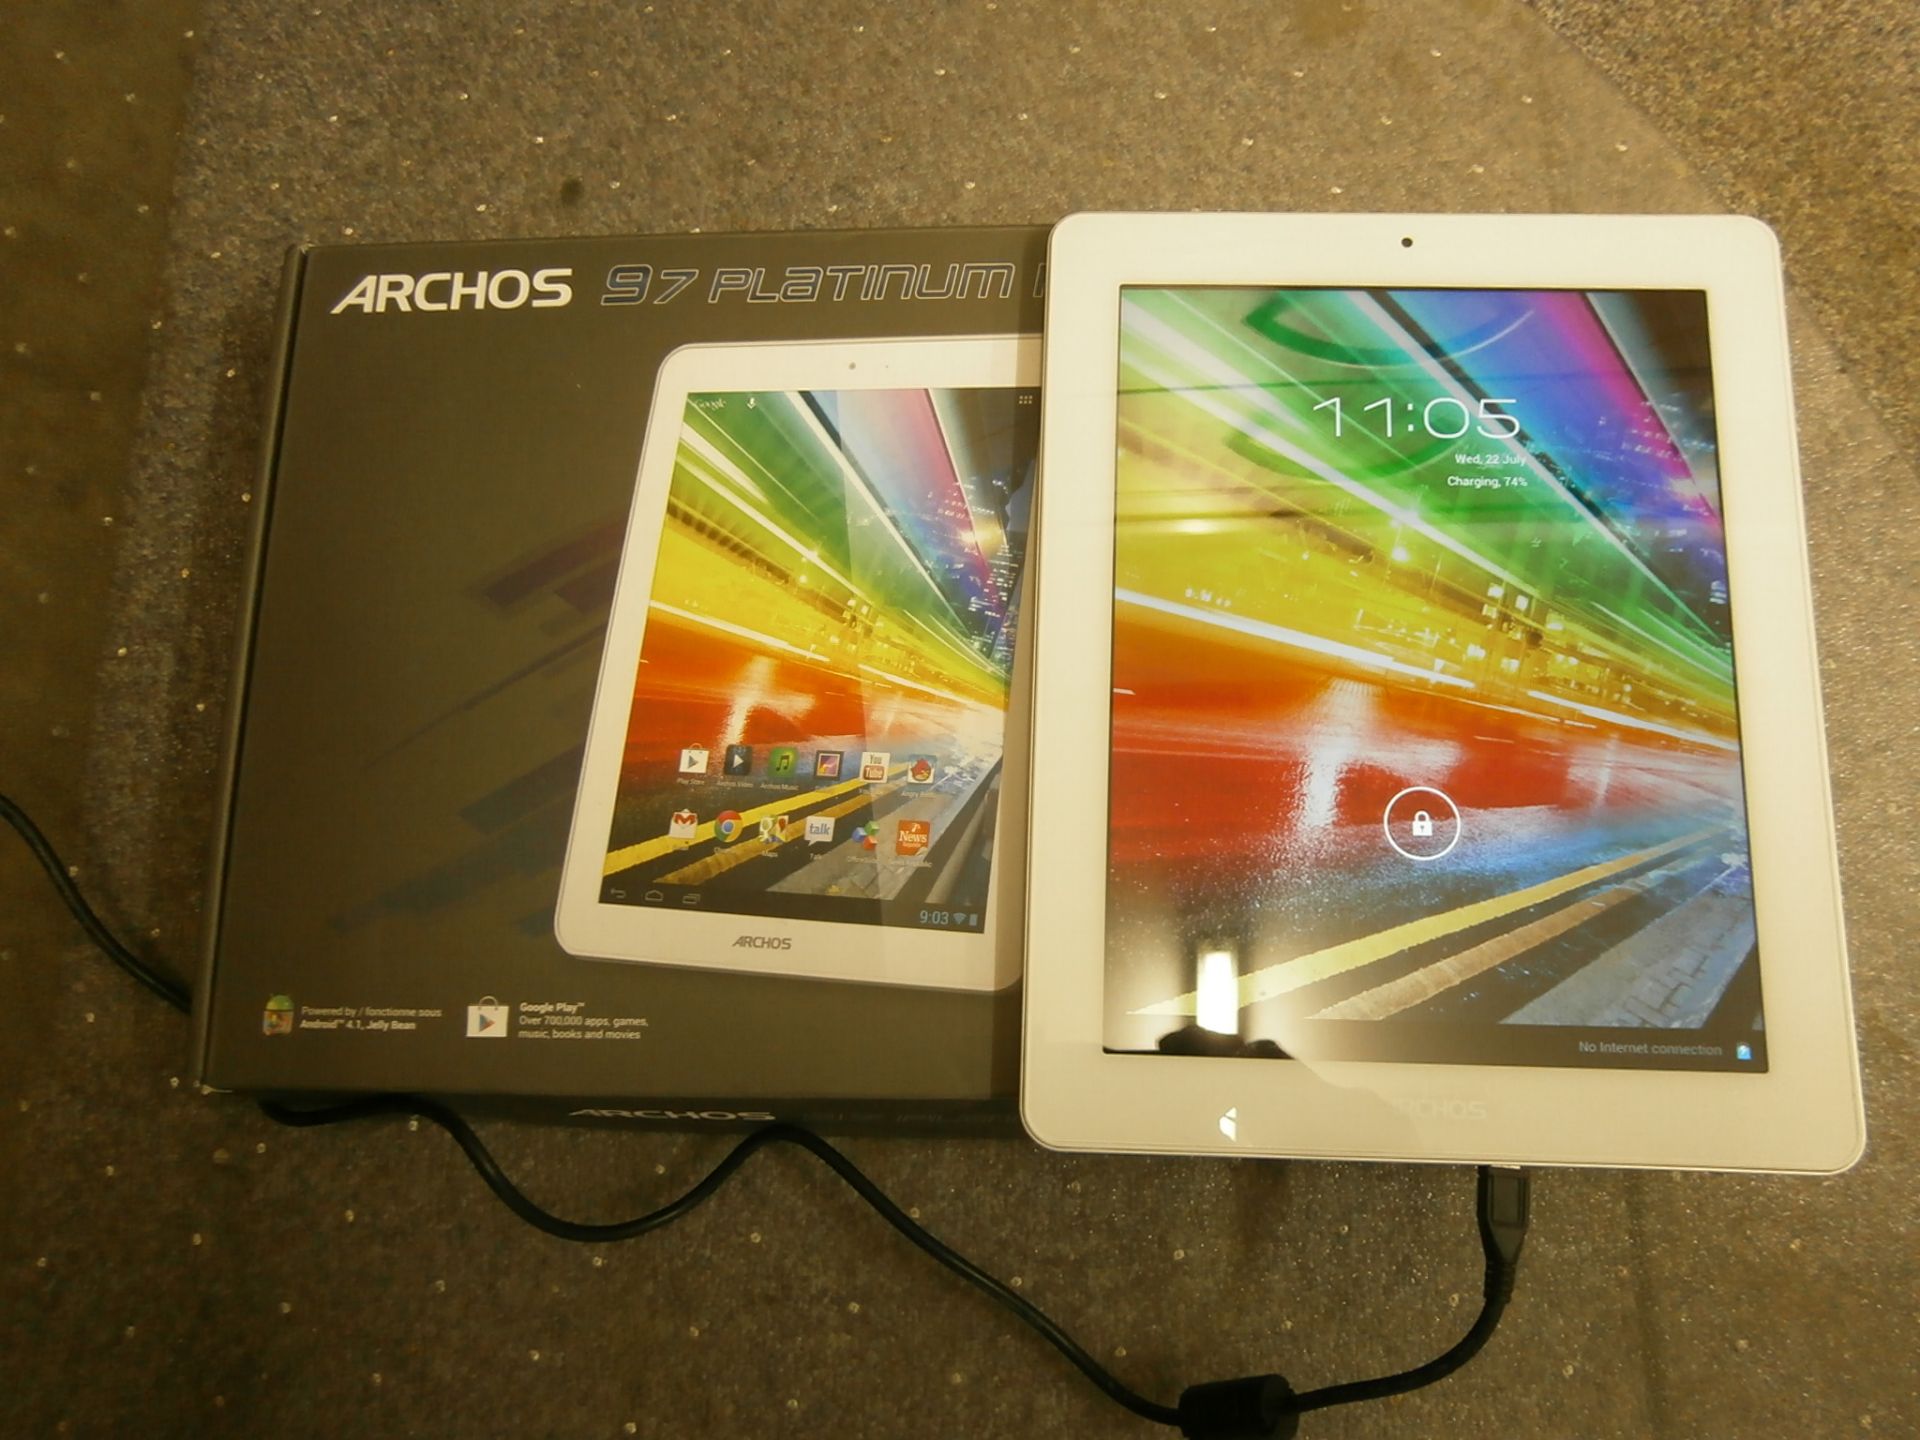 An Arcos 97 Platinum HD 10.1" Tablet 8GB Storage. Powered on test and working